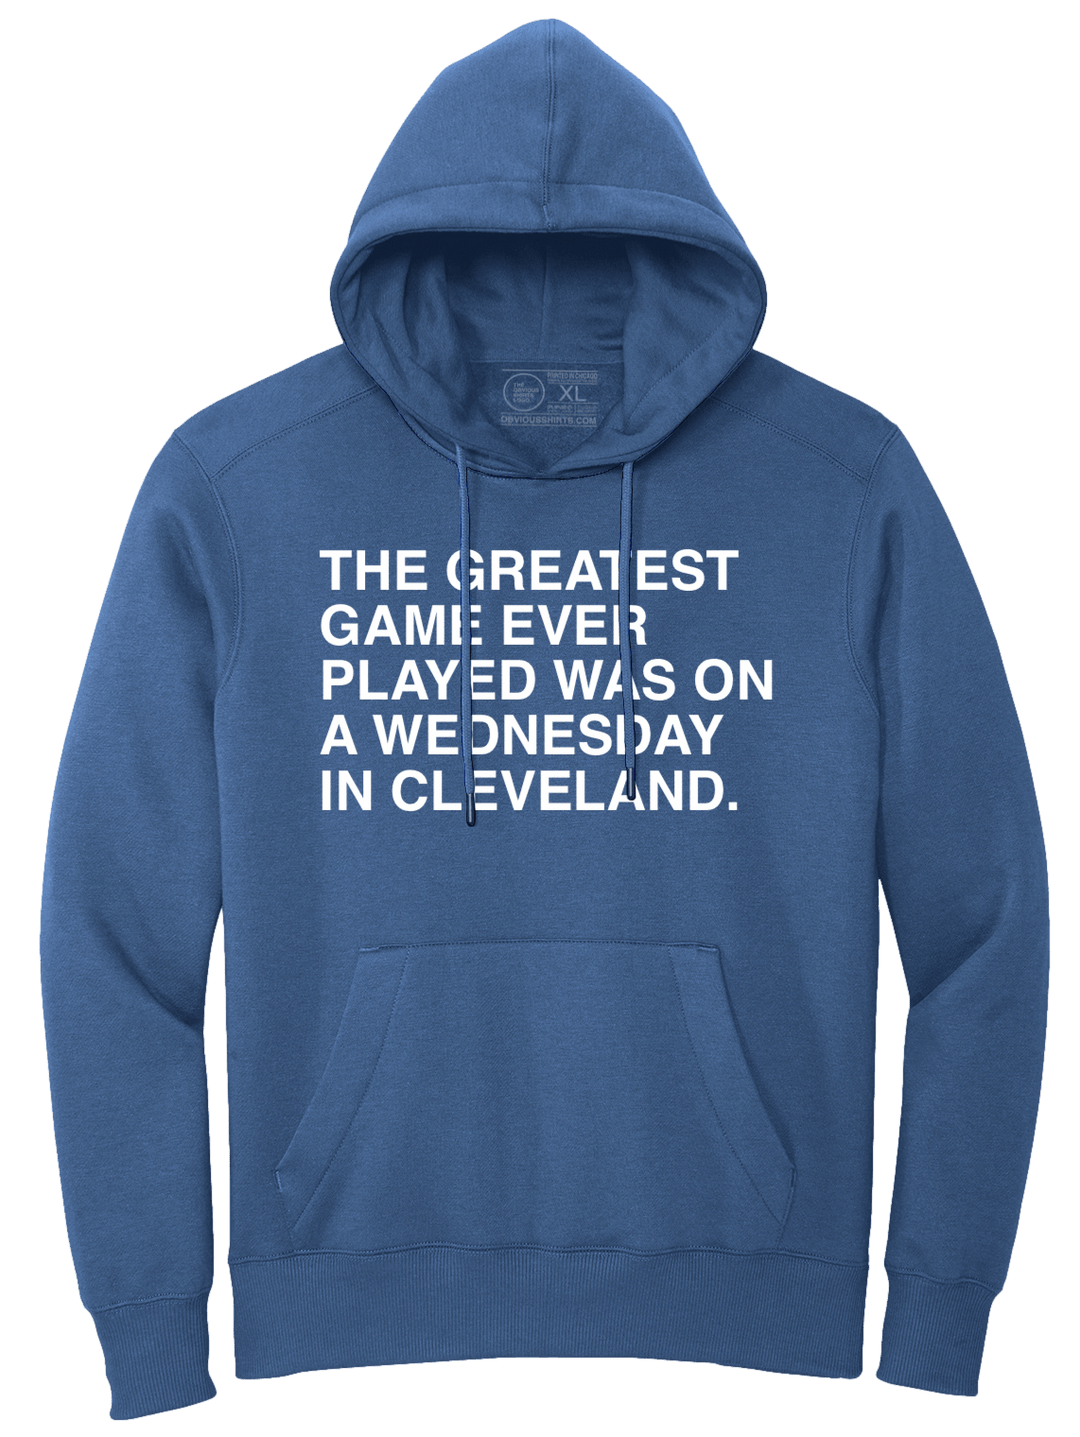 THE GREATEST GAME EVER PLAYED. (HOODED SWEATSHIRT) - OBVIOUS SHIRTS